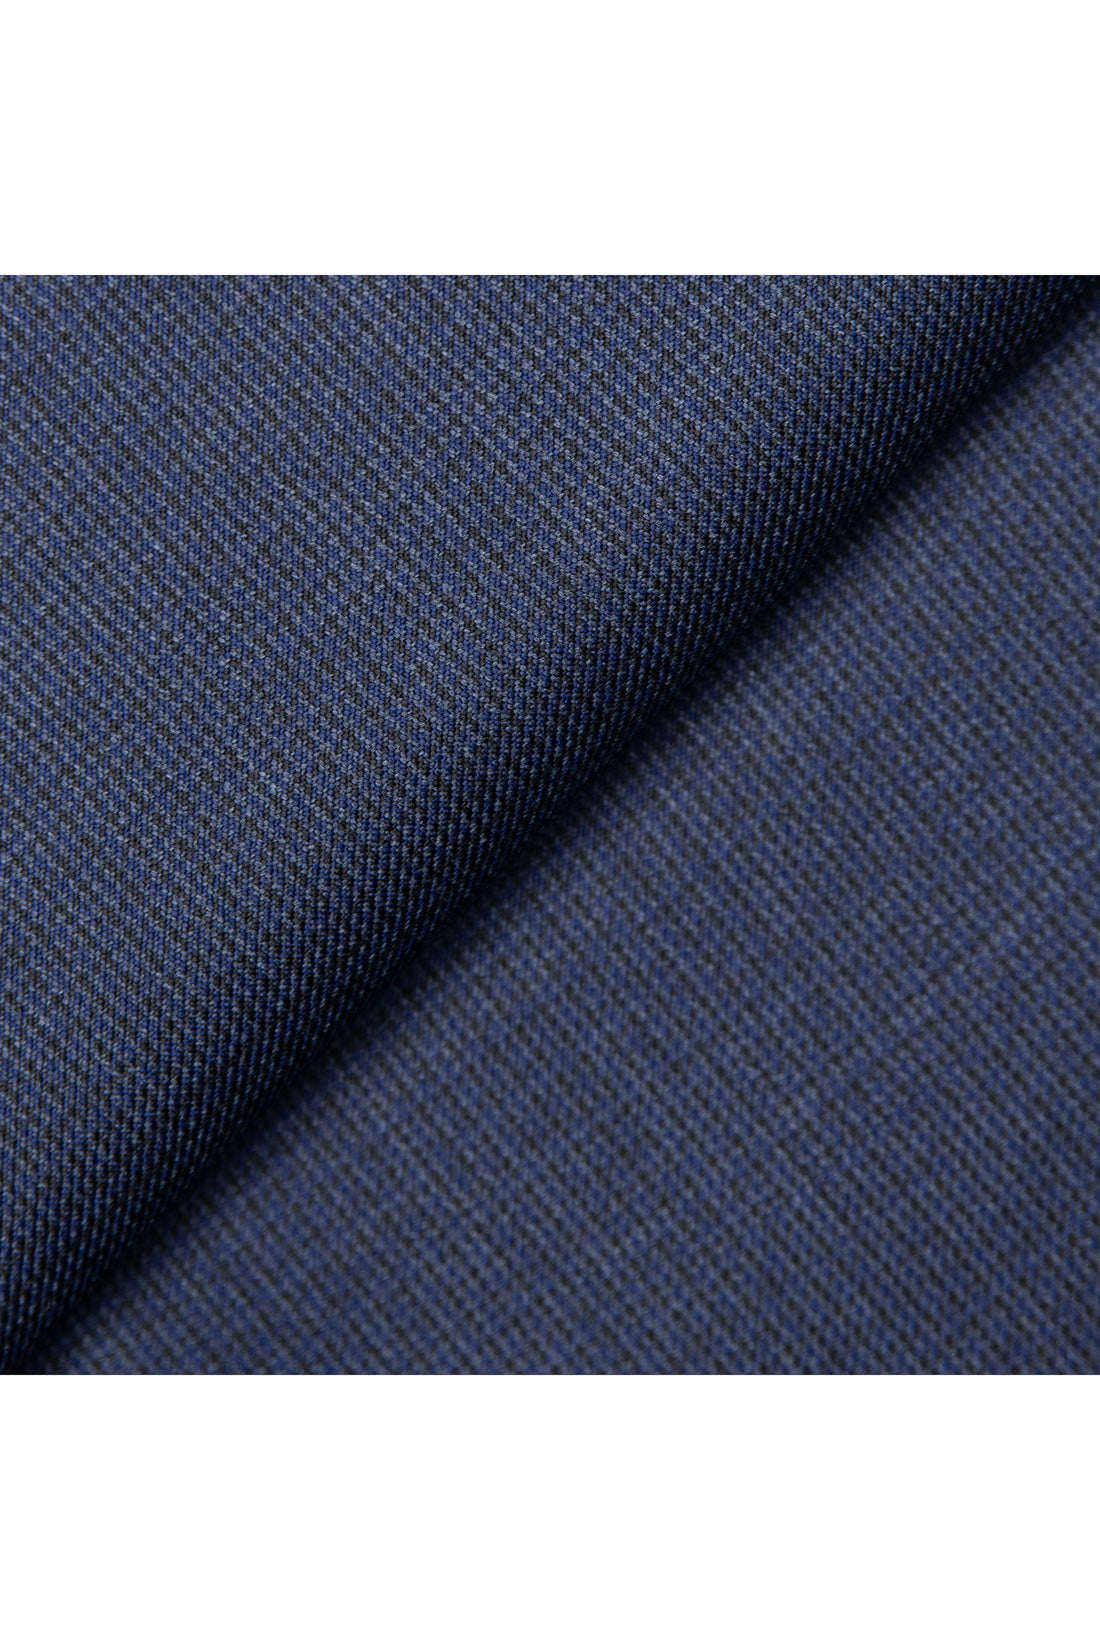 Blue Smart Wool Suit fabric swatch